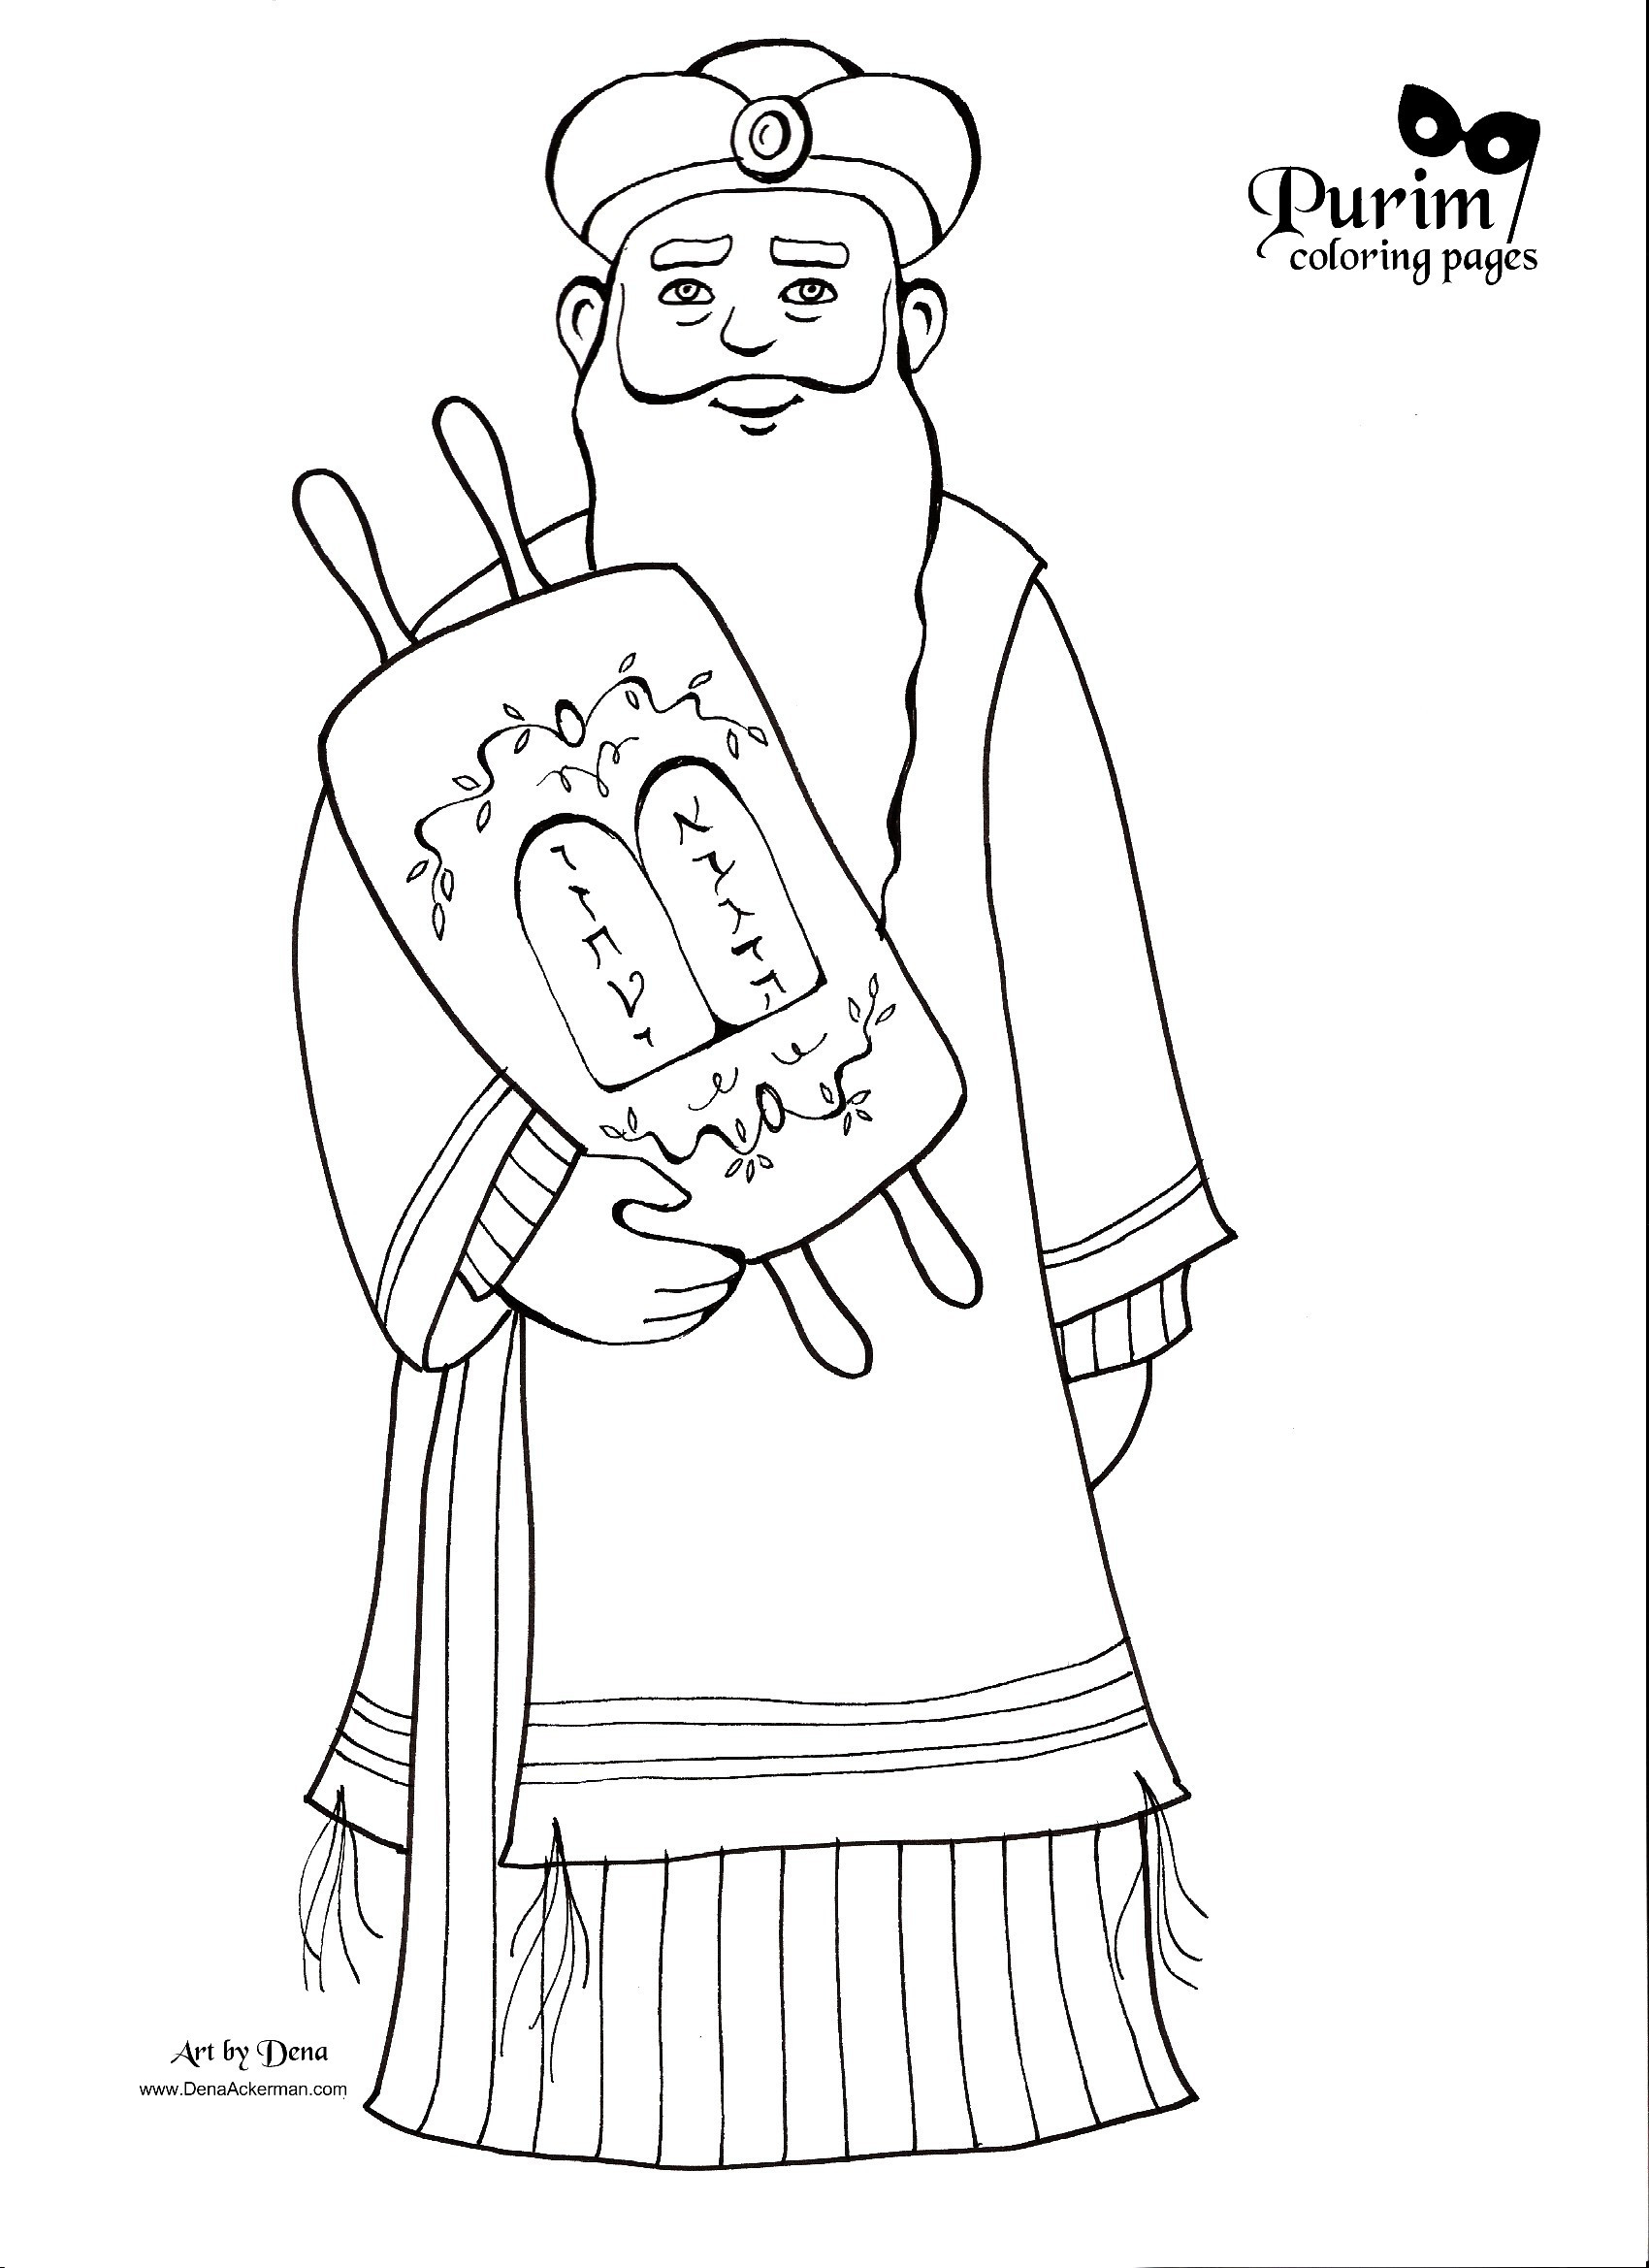 Purim Coloring Page Coca Cola Coloring Pages Fresh Purim Coloring Pages To And Print For